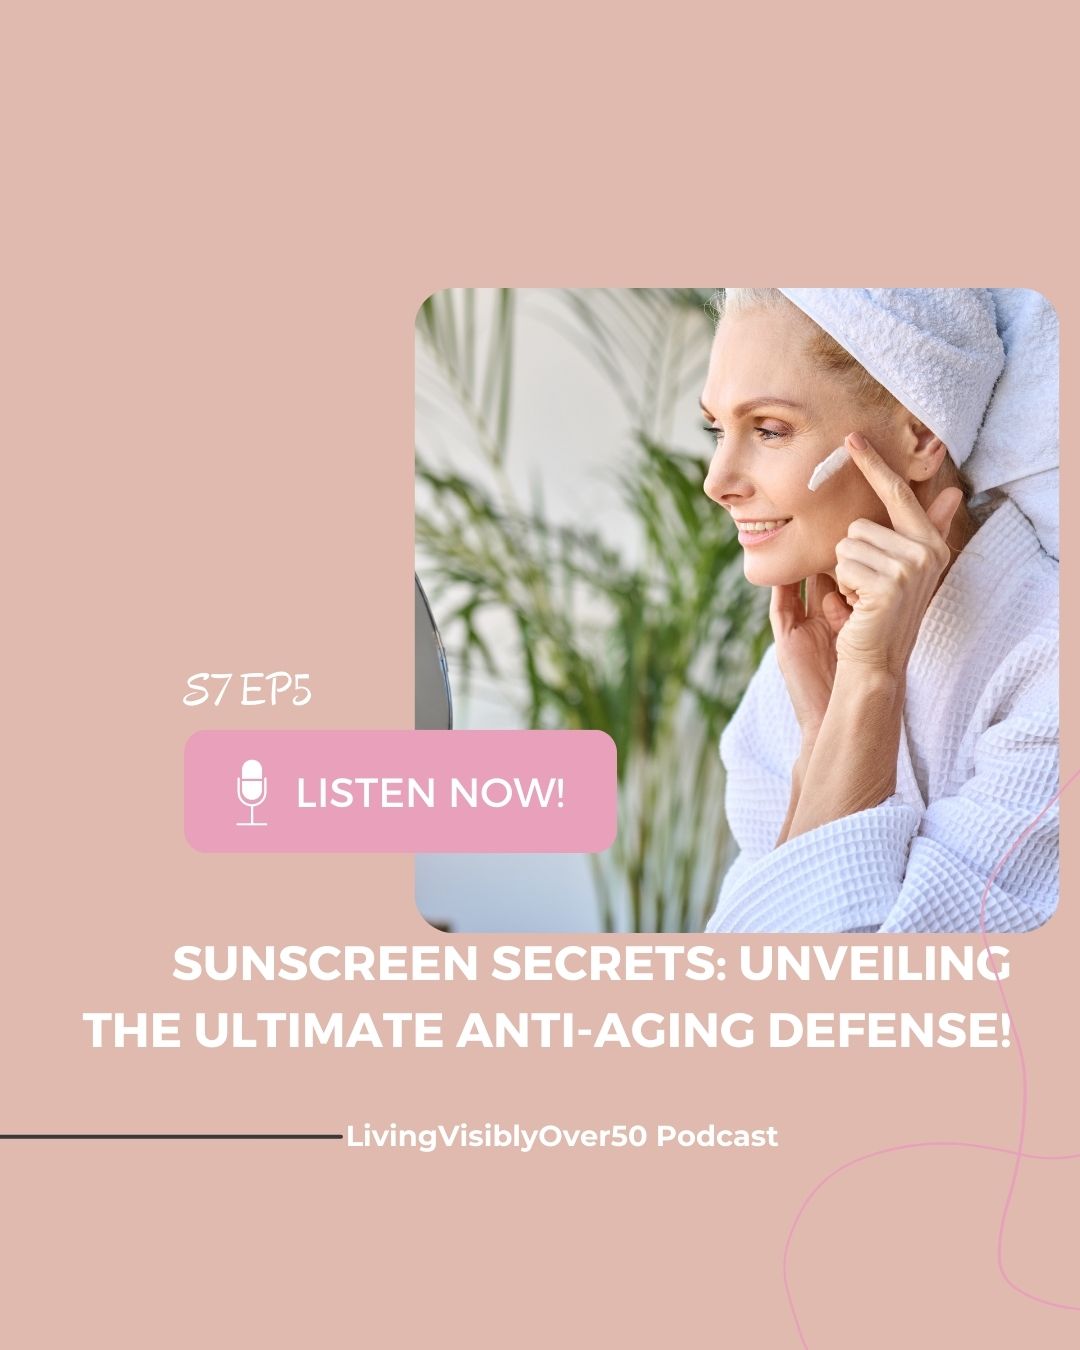 Living Visibly Over 50 podcast | Sunscreen secrets: Unveiling the Ultimate Anti-Aging Defense.